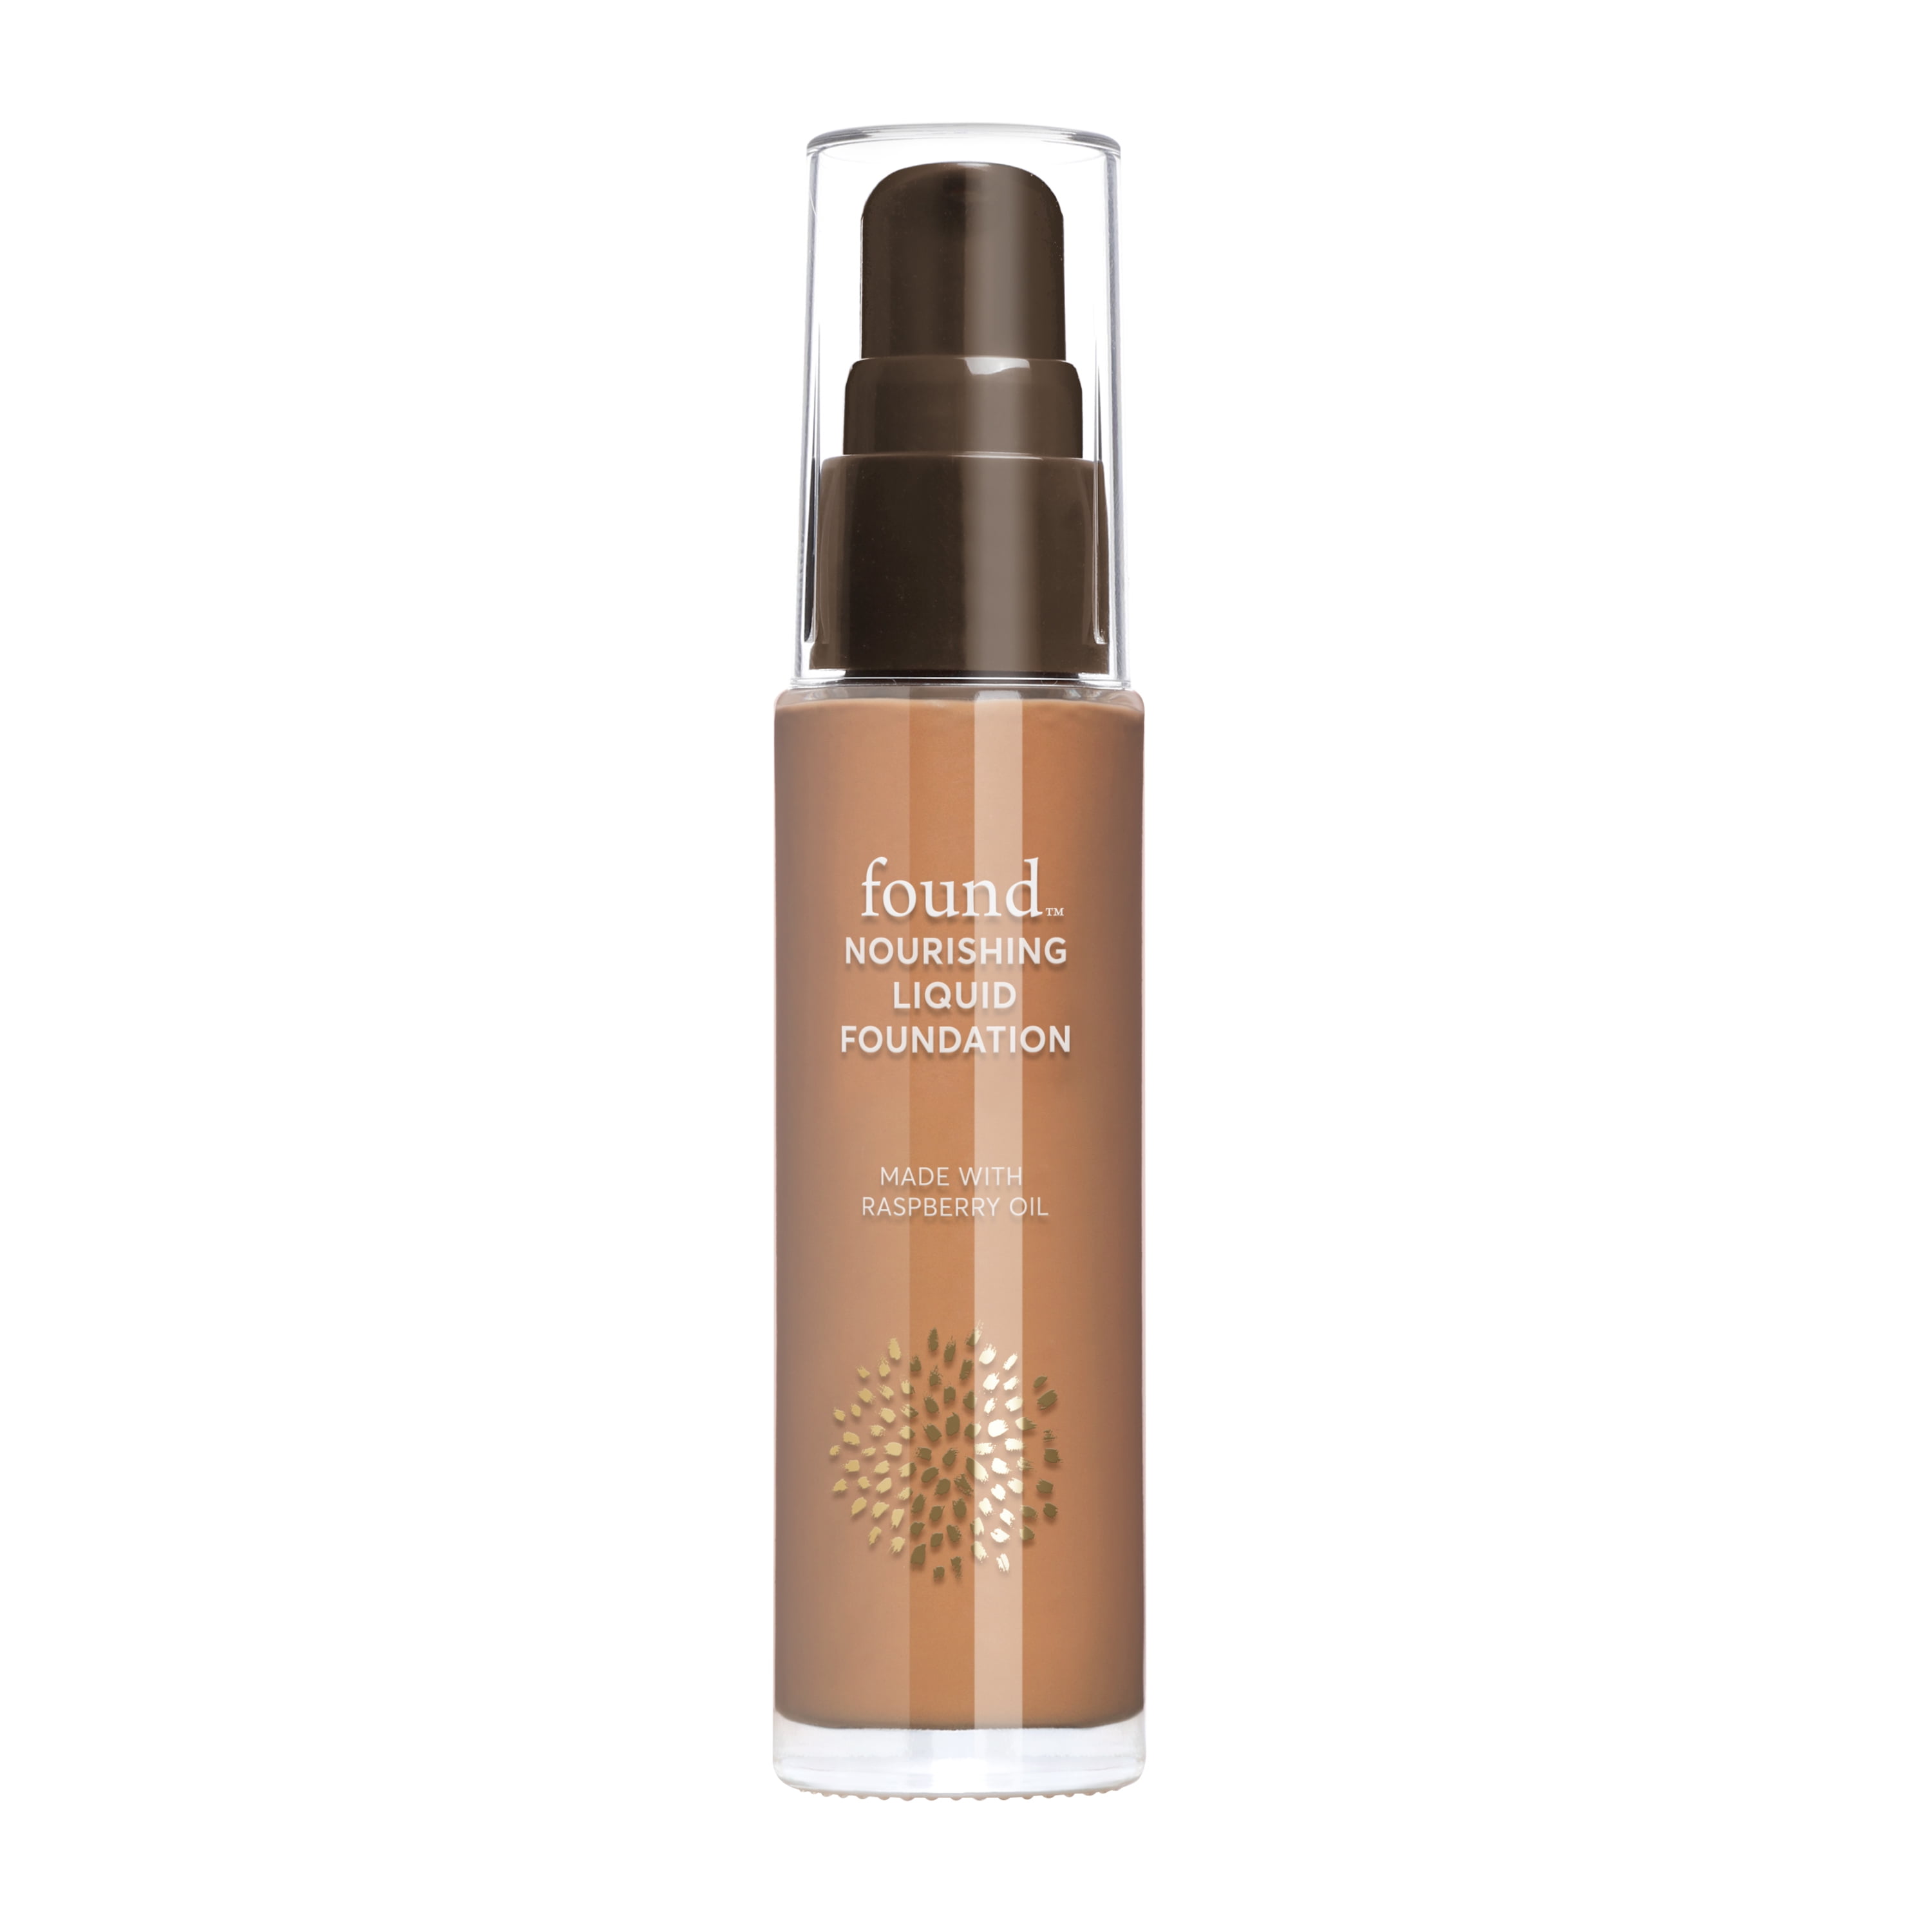 FOUND Nourishing Liquid Foundation with Raspberry Oil, 175 Cool Golden ...